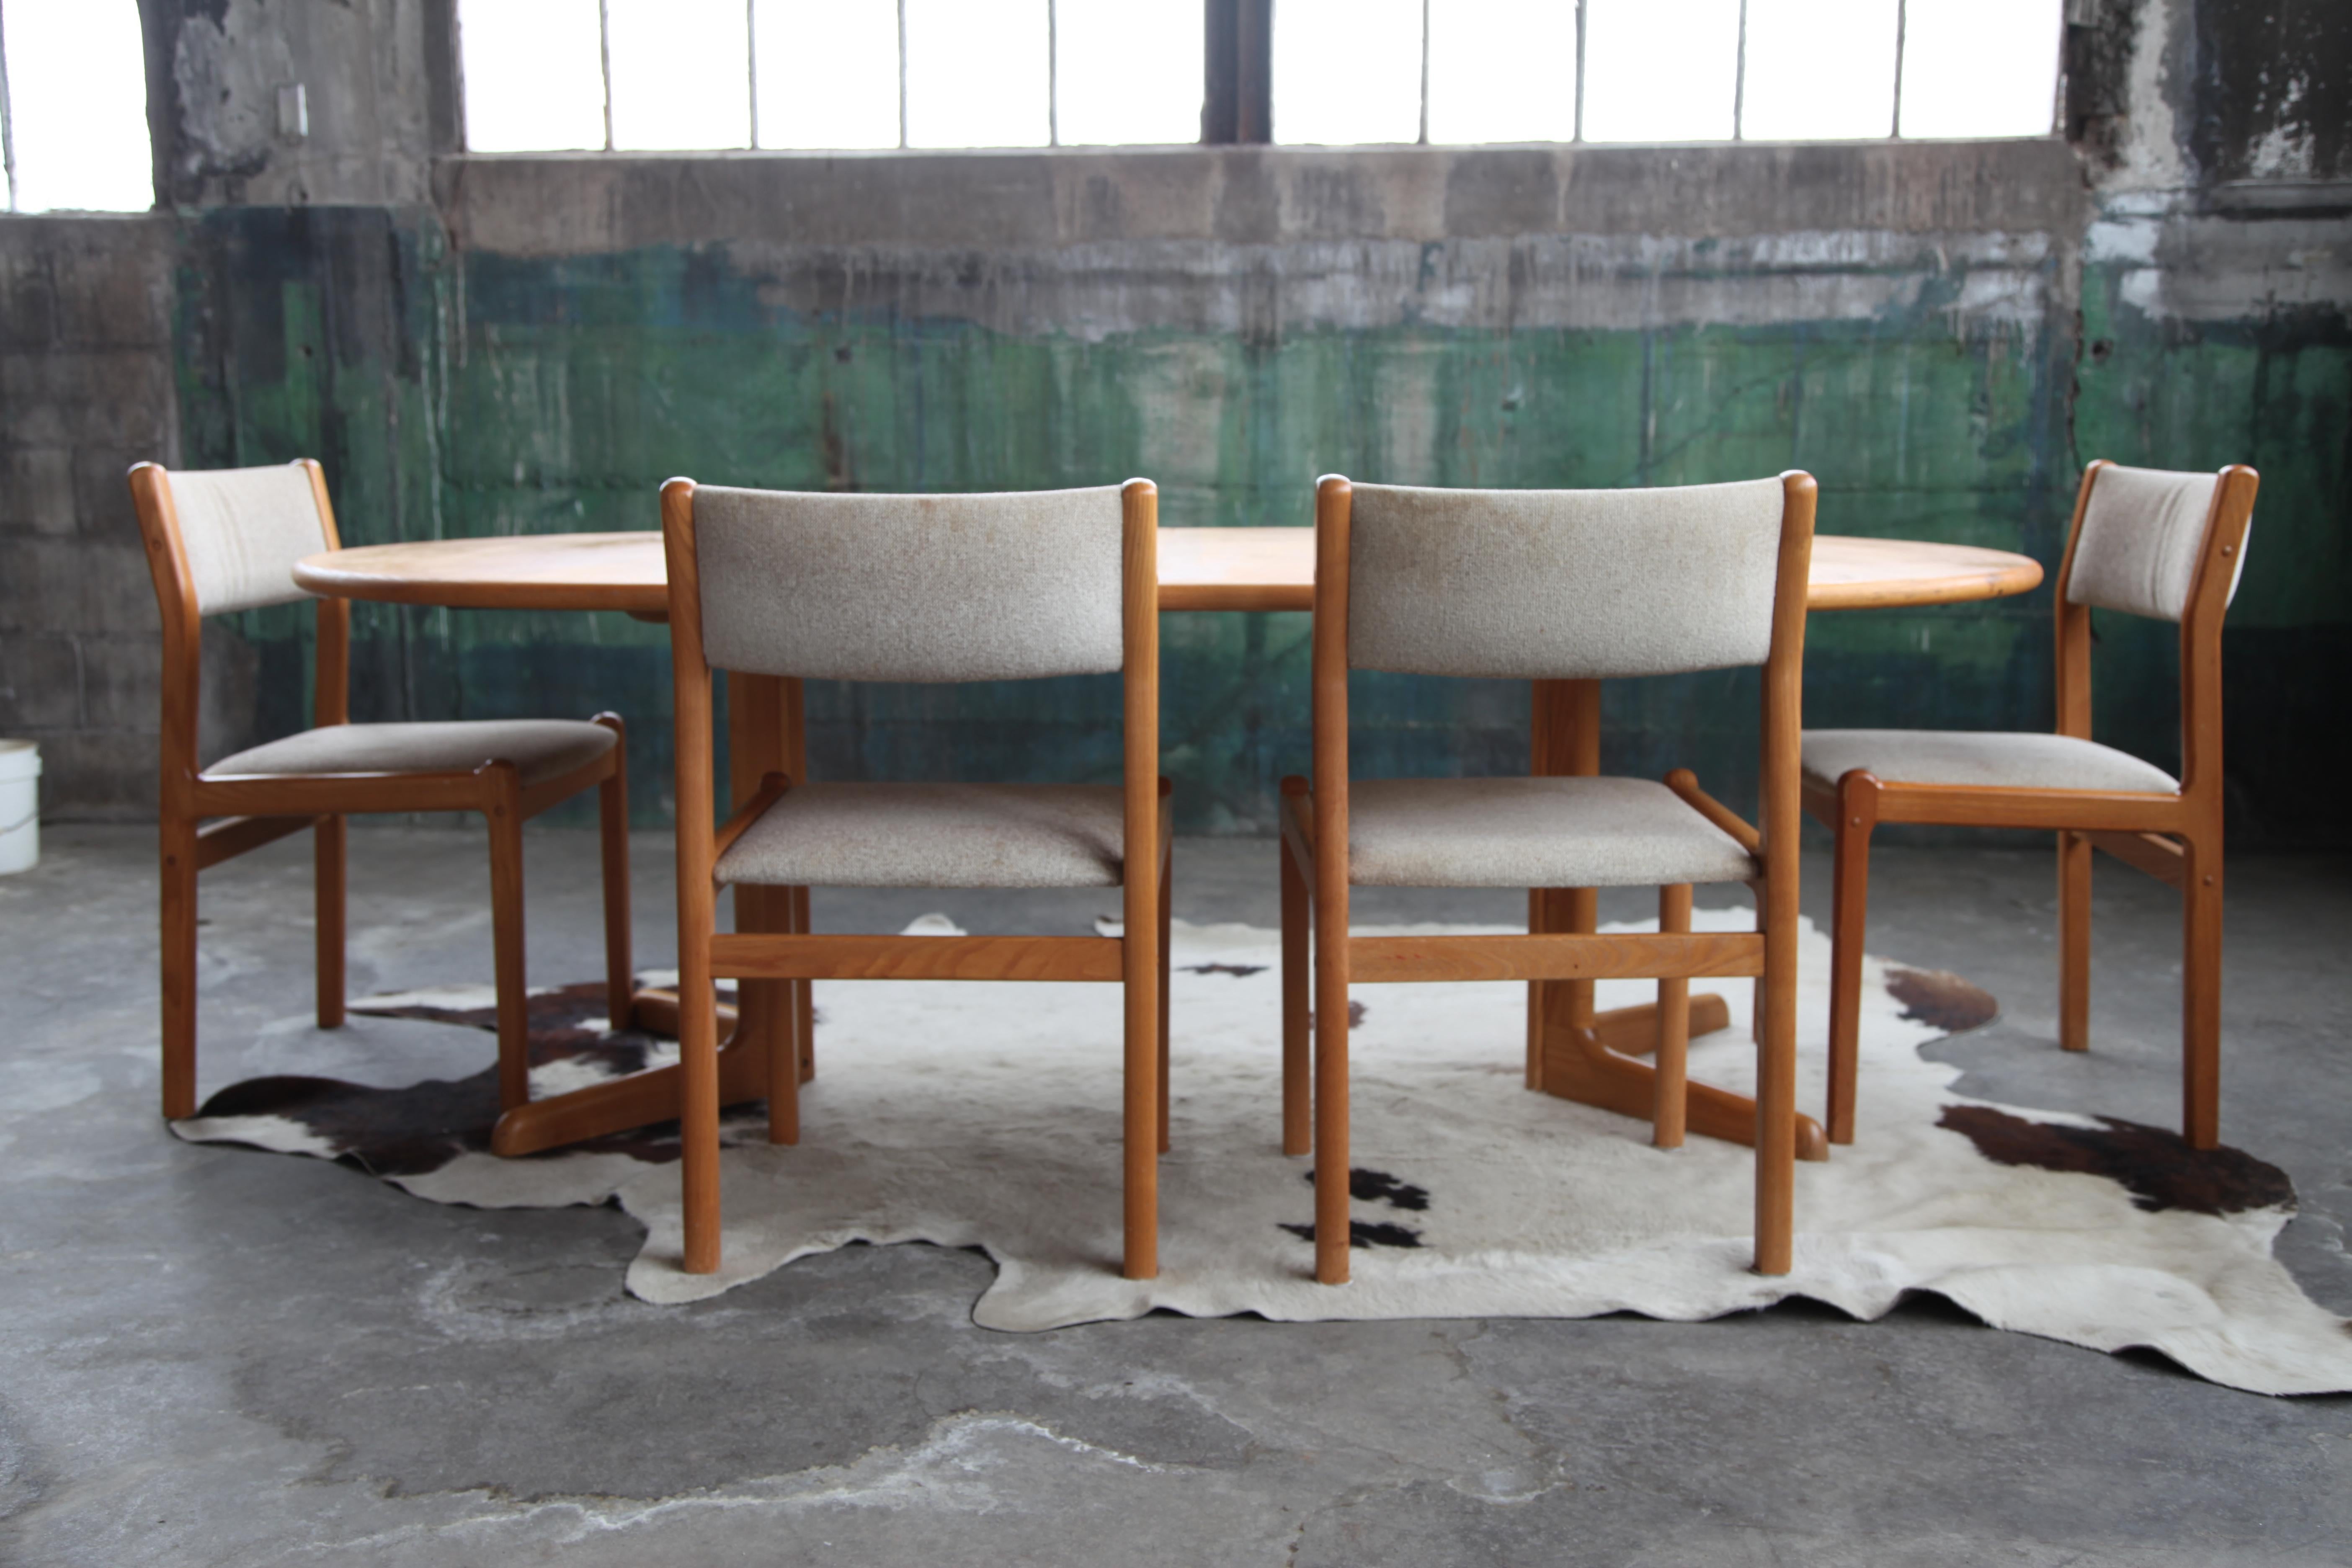 MCM Round to Oval Dining Table w/ Leaves + 4 Chairs by Gudme Jl Moller, 9 Pcs In Good Condition For Sale In Madison, WI